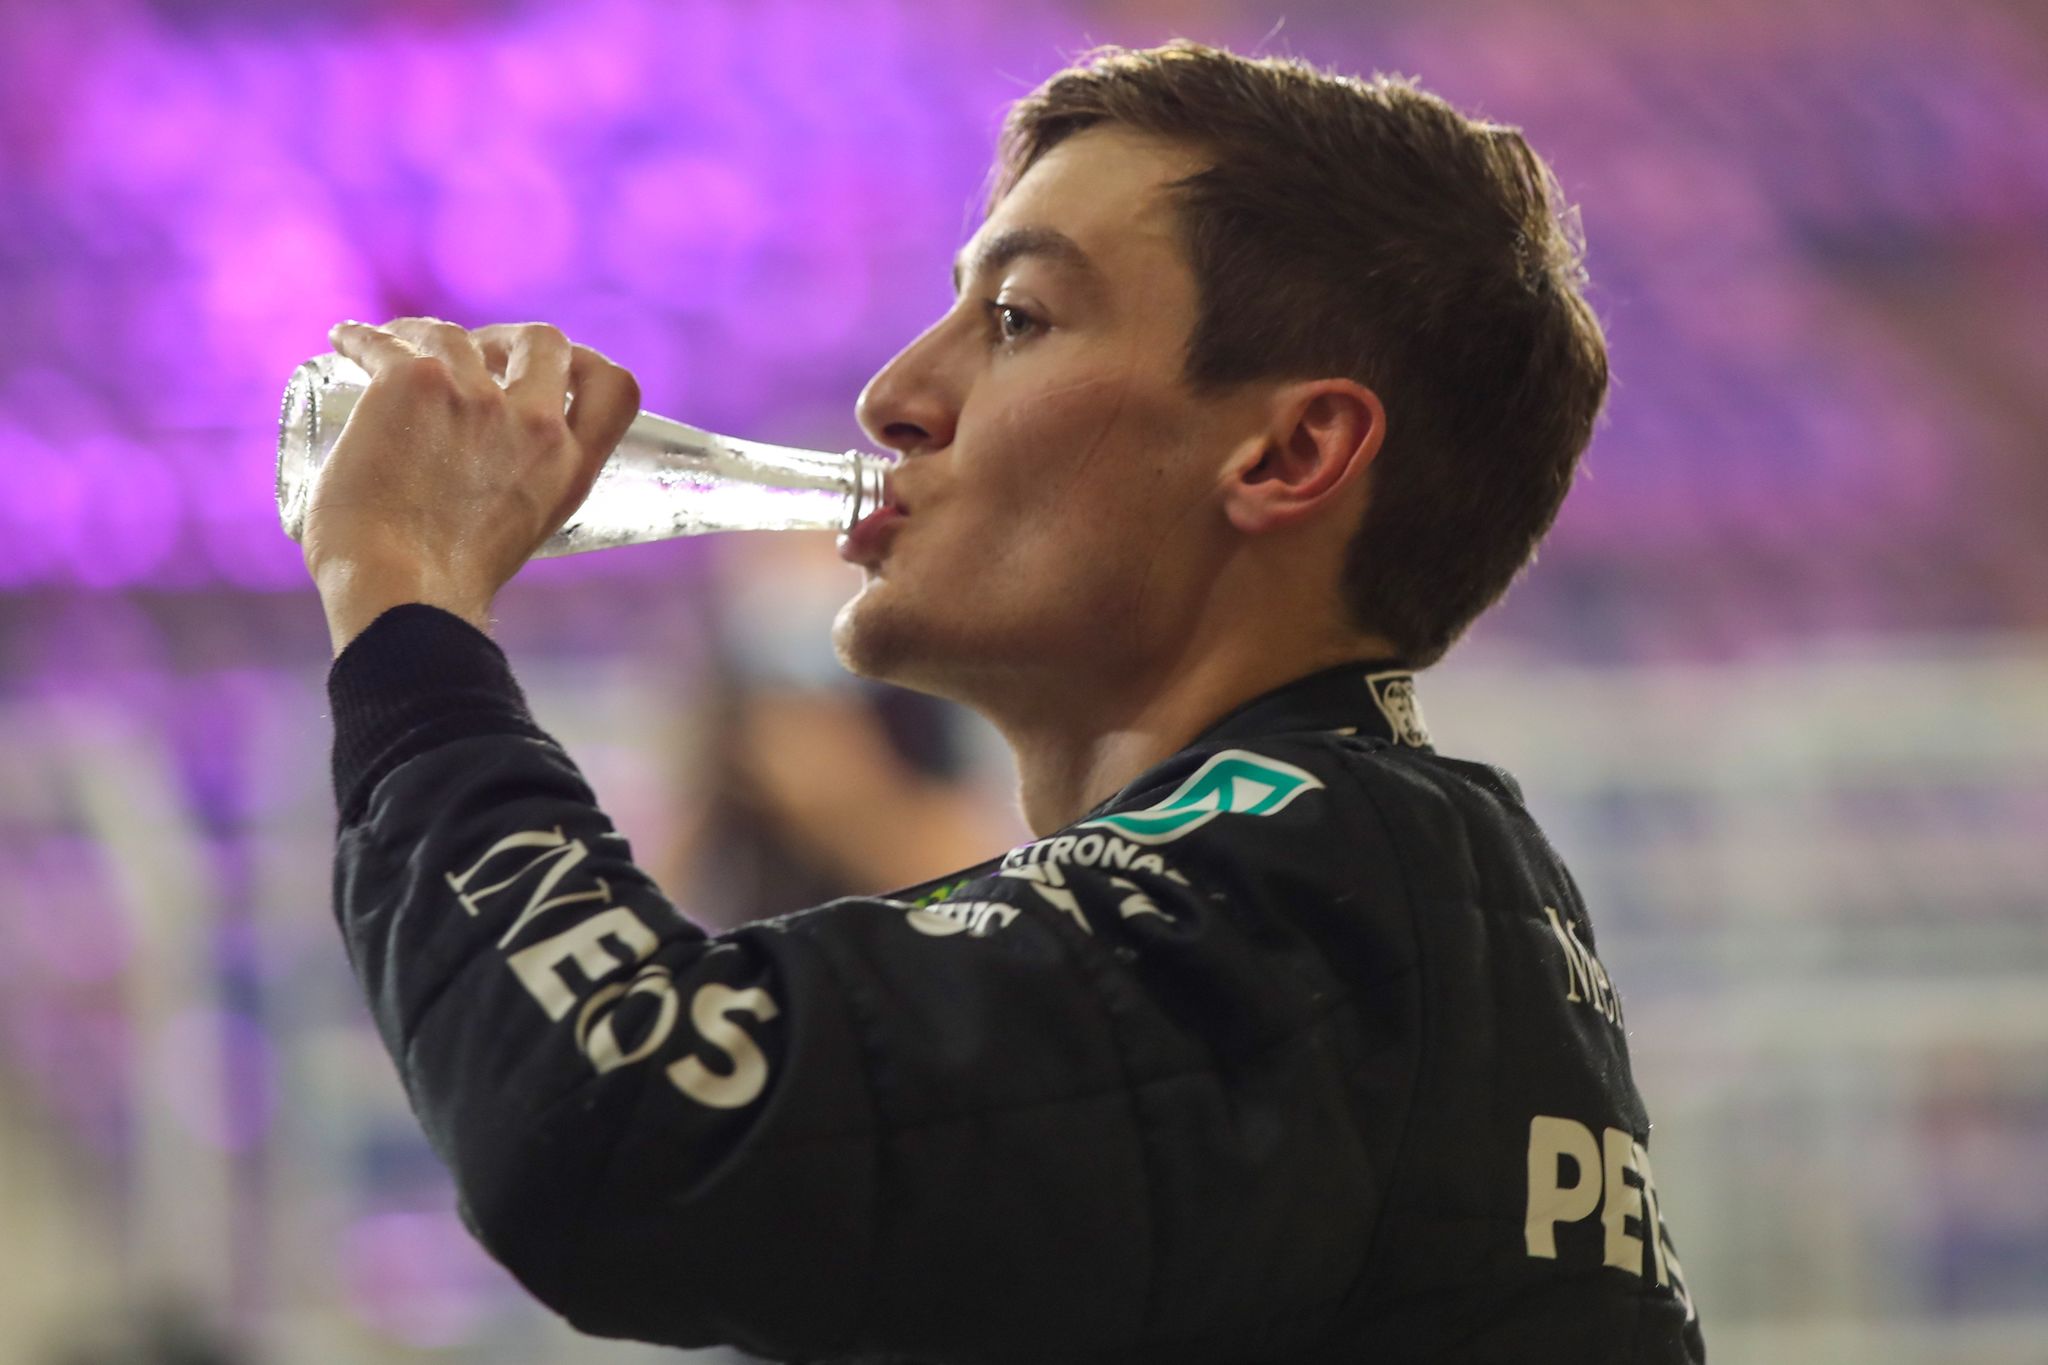 Mercedes British driver George Russell drinks water after the qualifying session ahead of the Sakhir Formula One Grand Prix at the Bahrain International Circuit in the city of Sakhir on December 5, 2020. - Valtteri Bottas claimed pole position for Sundays Sakhir Grand Prix, edging out Mercedes teammate George Russell in qualifying on Saturday in the absence of lt;HIT gt;Lewis lt;/HIT gt; lt;HIT gt;Hamilton lt;/HIT gt;. (Photo by TOLGA BOZOGLU / POOL / AFP)